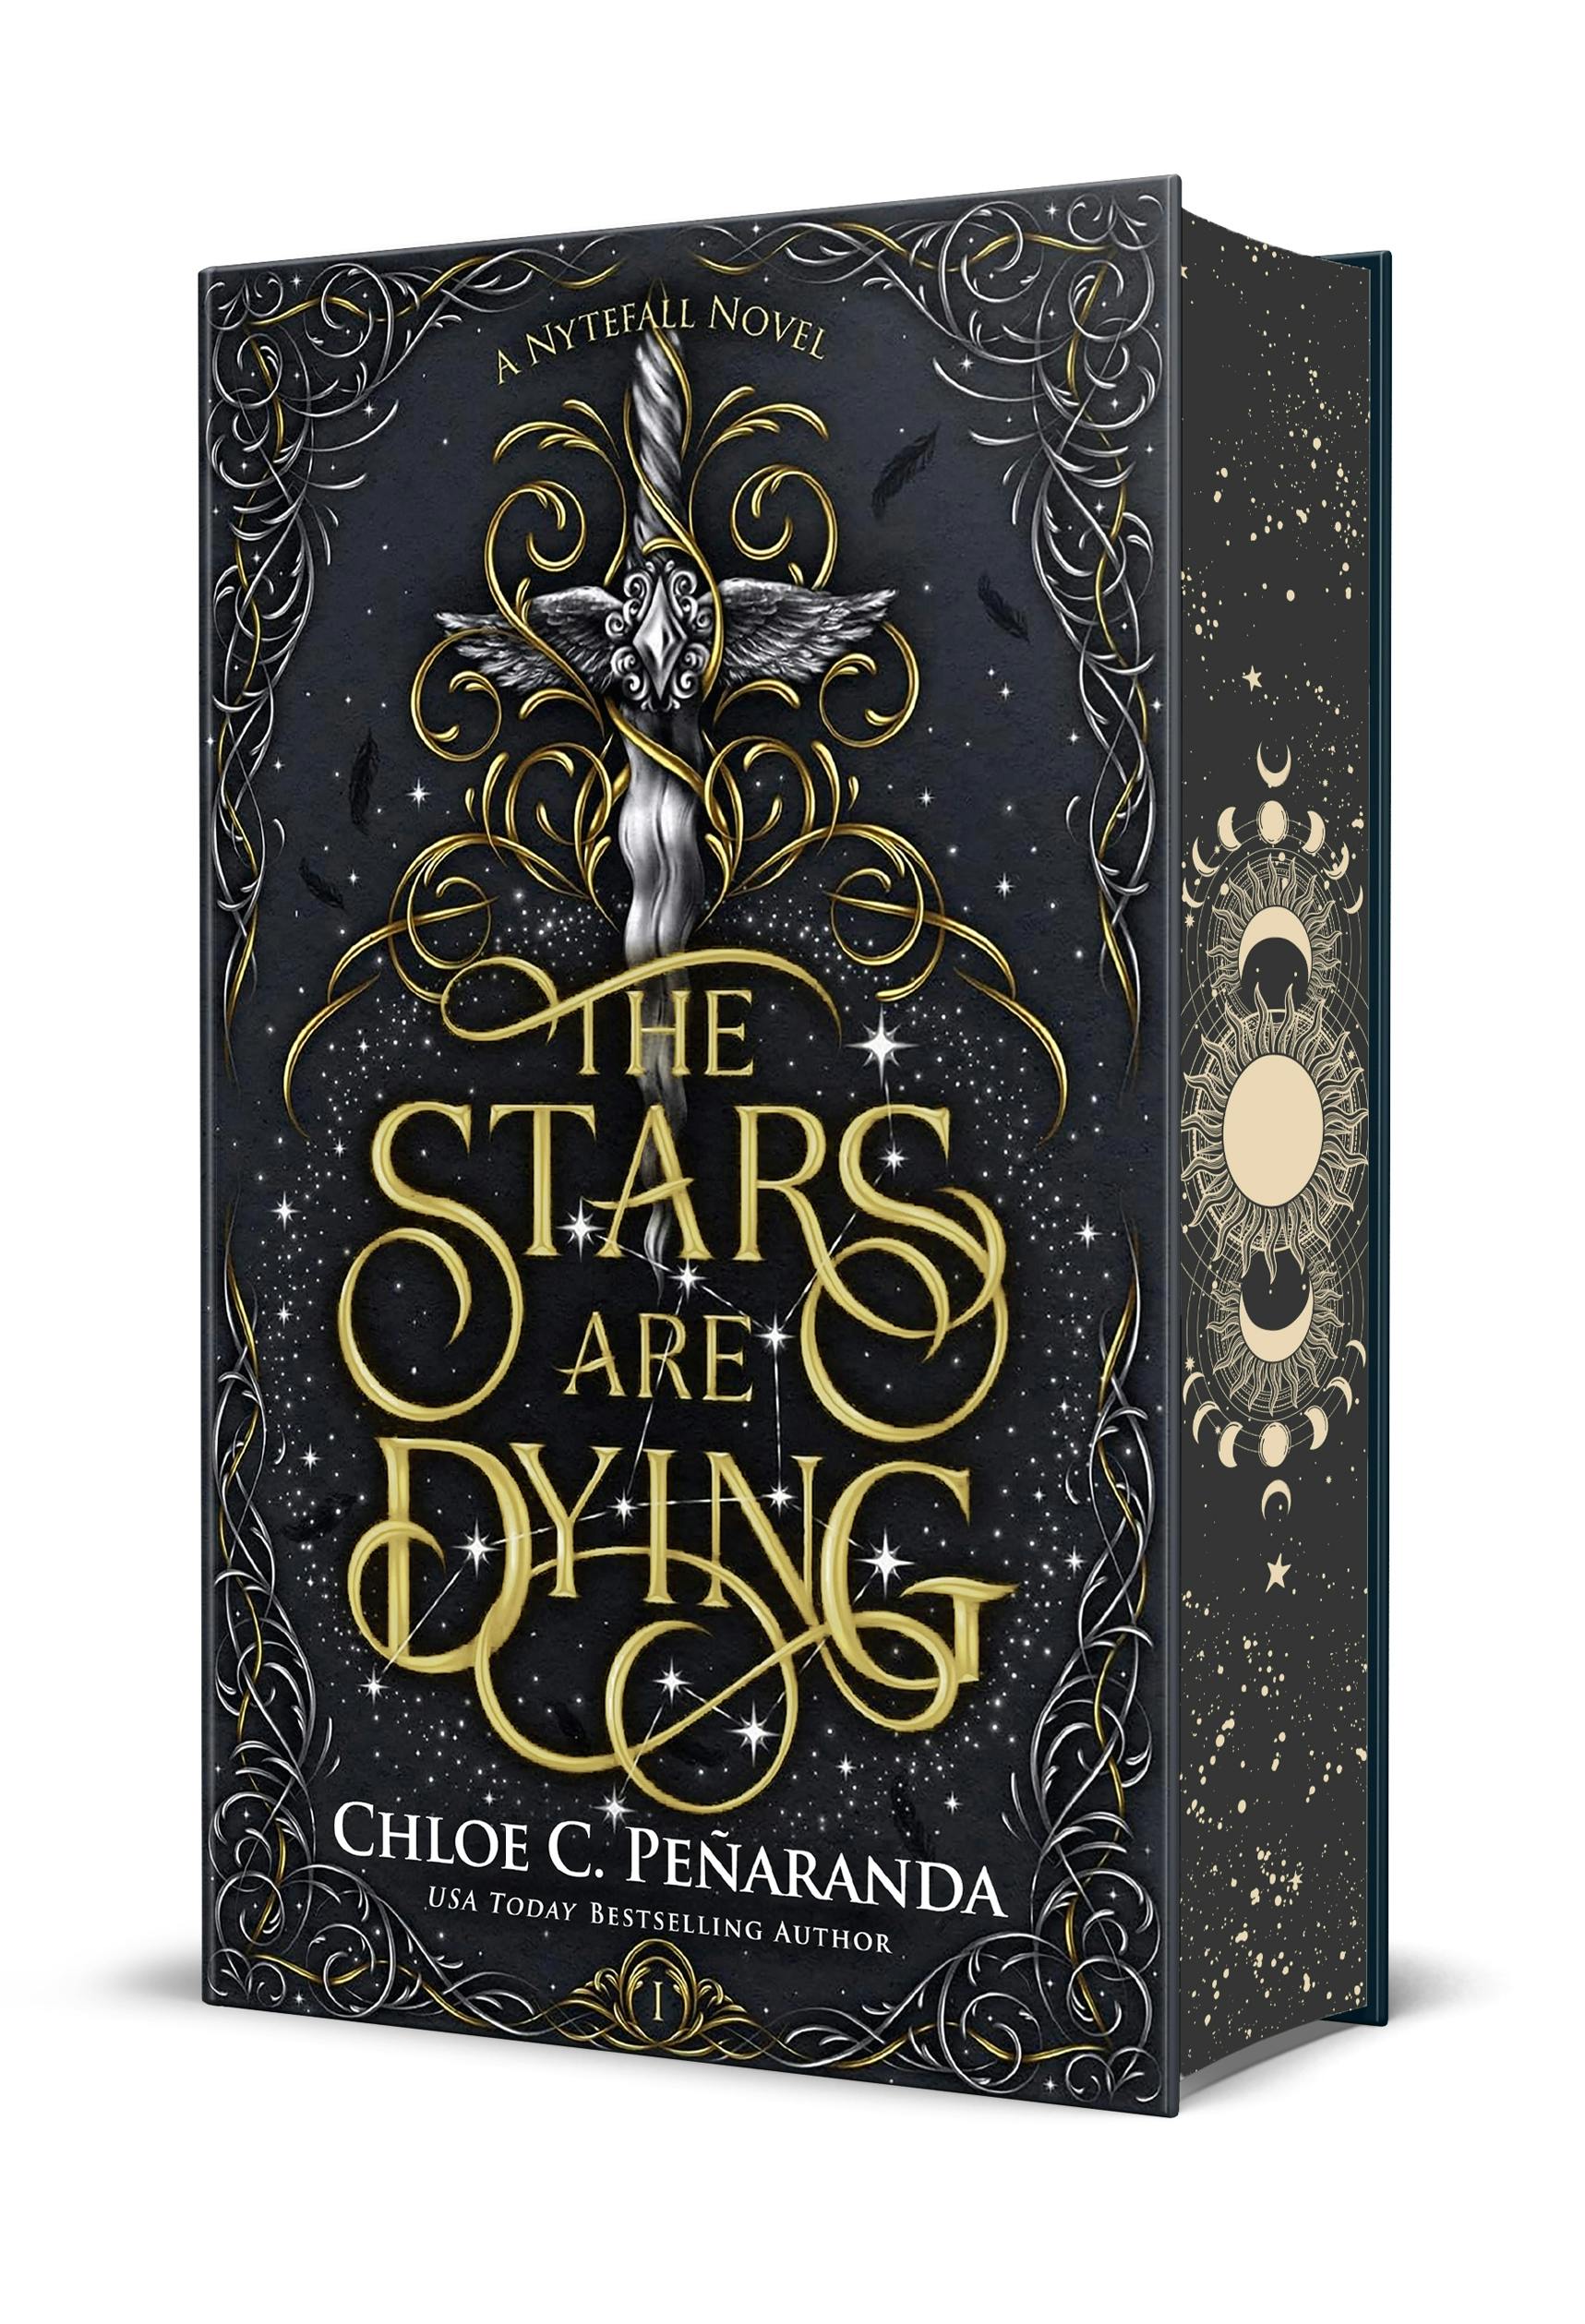 Cover for the book titled as: The Stars Are Dying